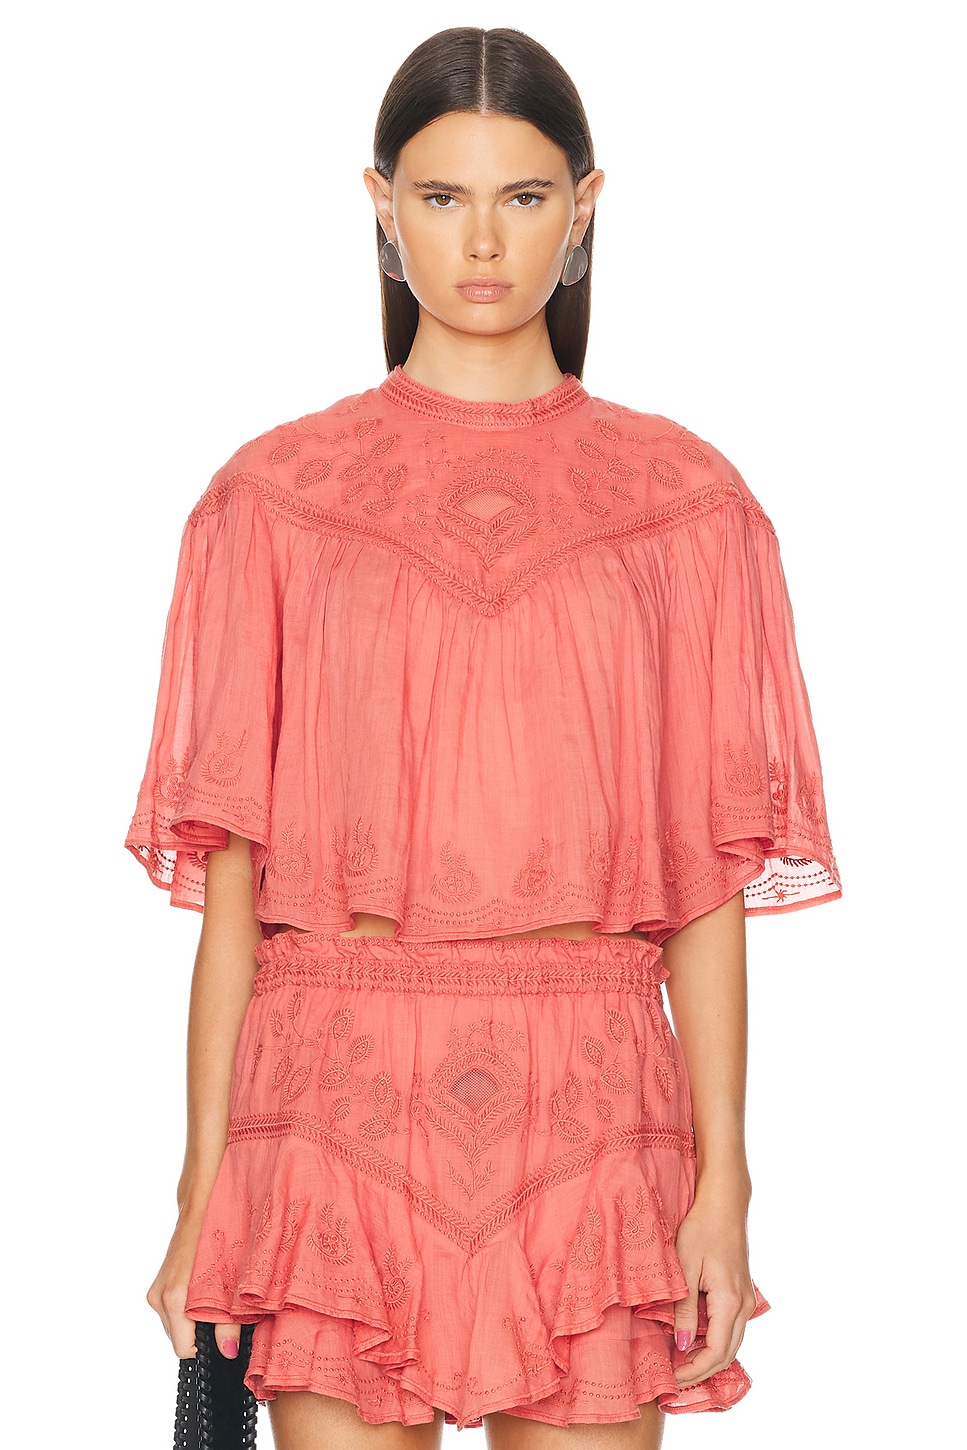 Elodia Blouse in Pink